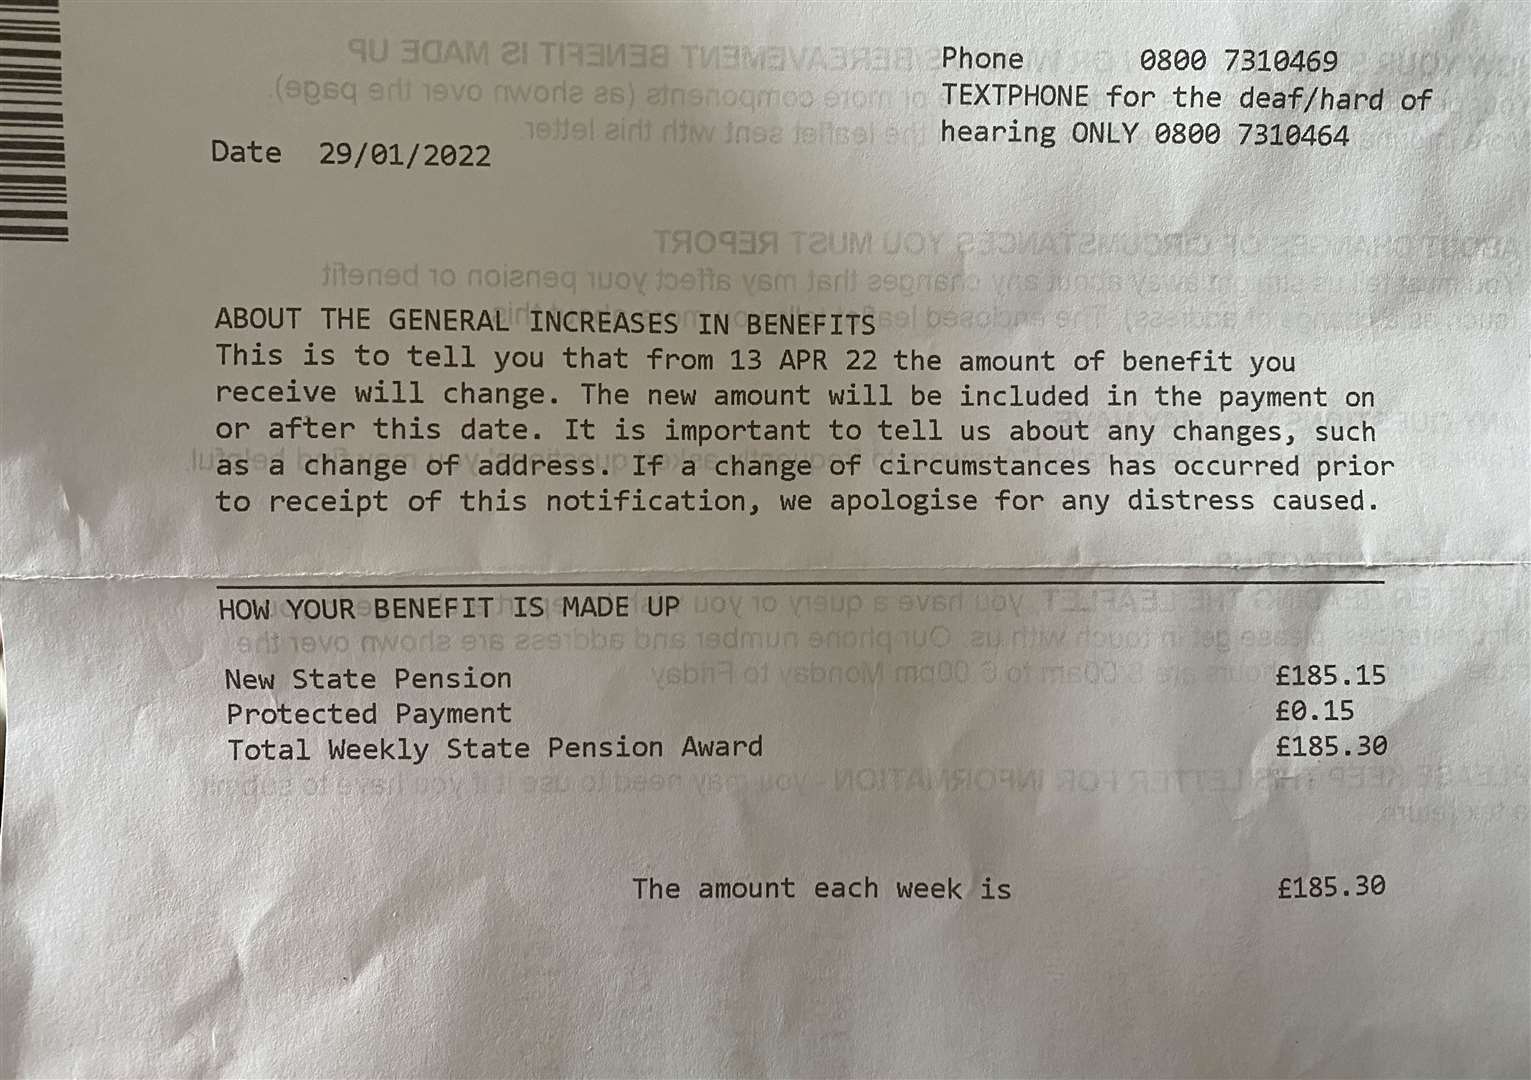 Mr Bodek's letter from the Pension Service.